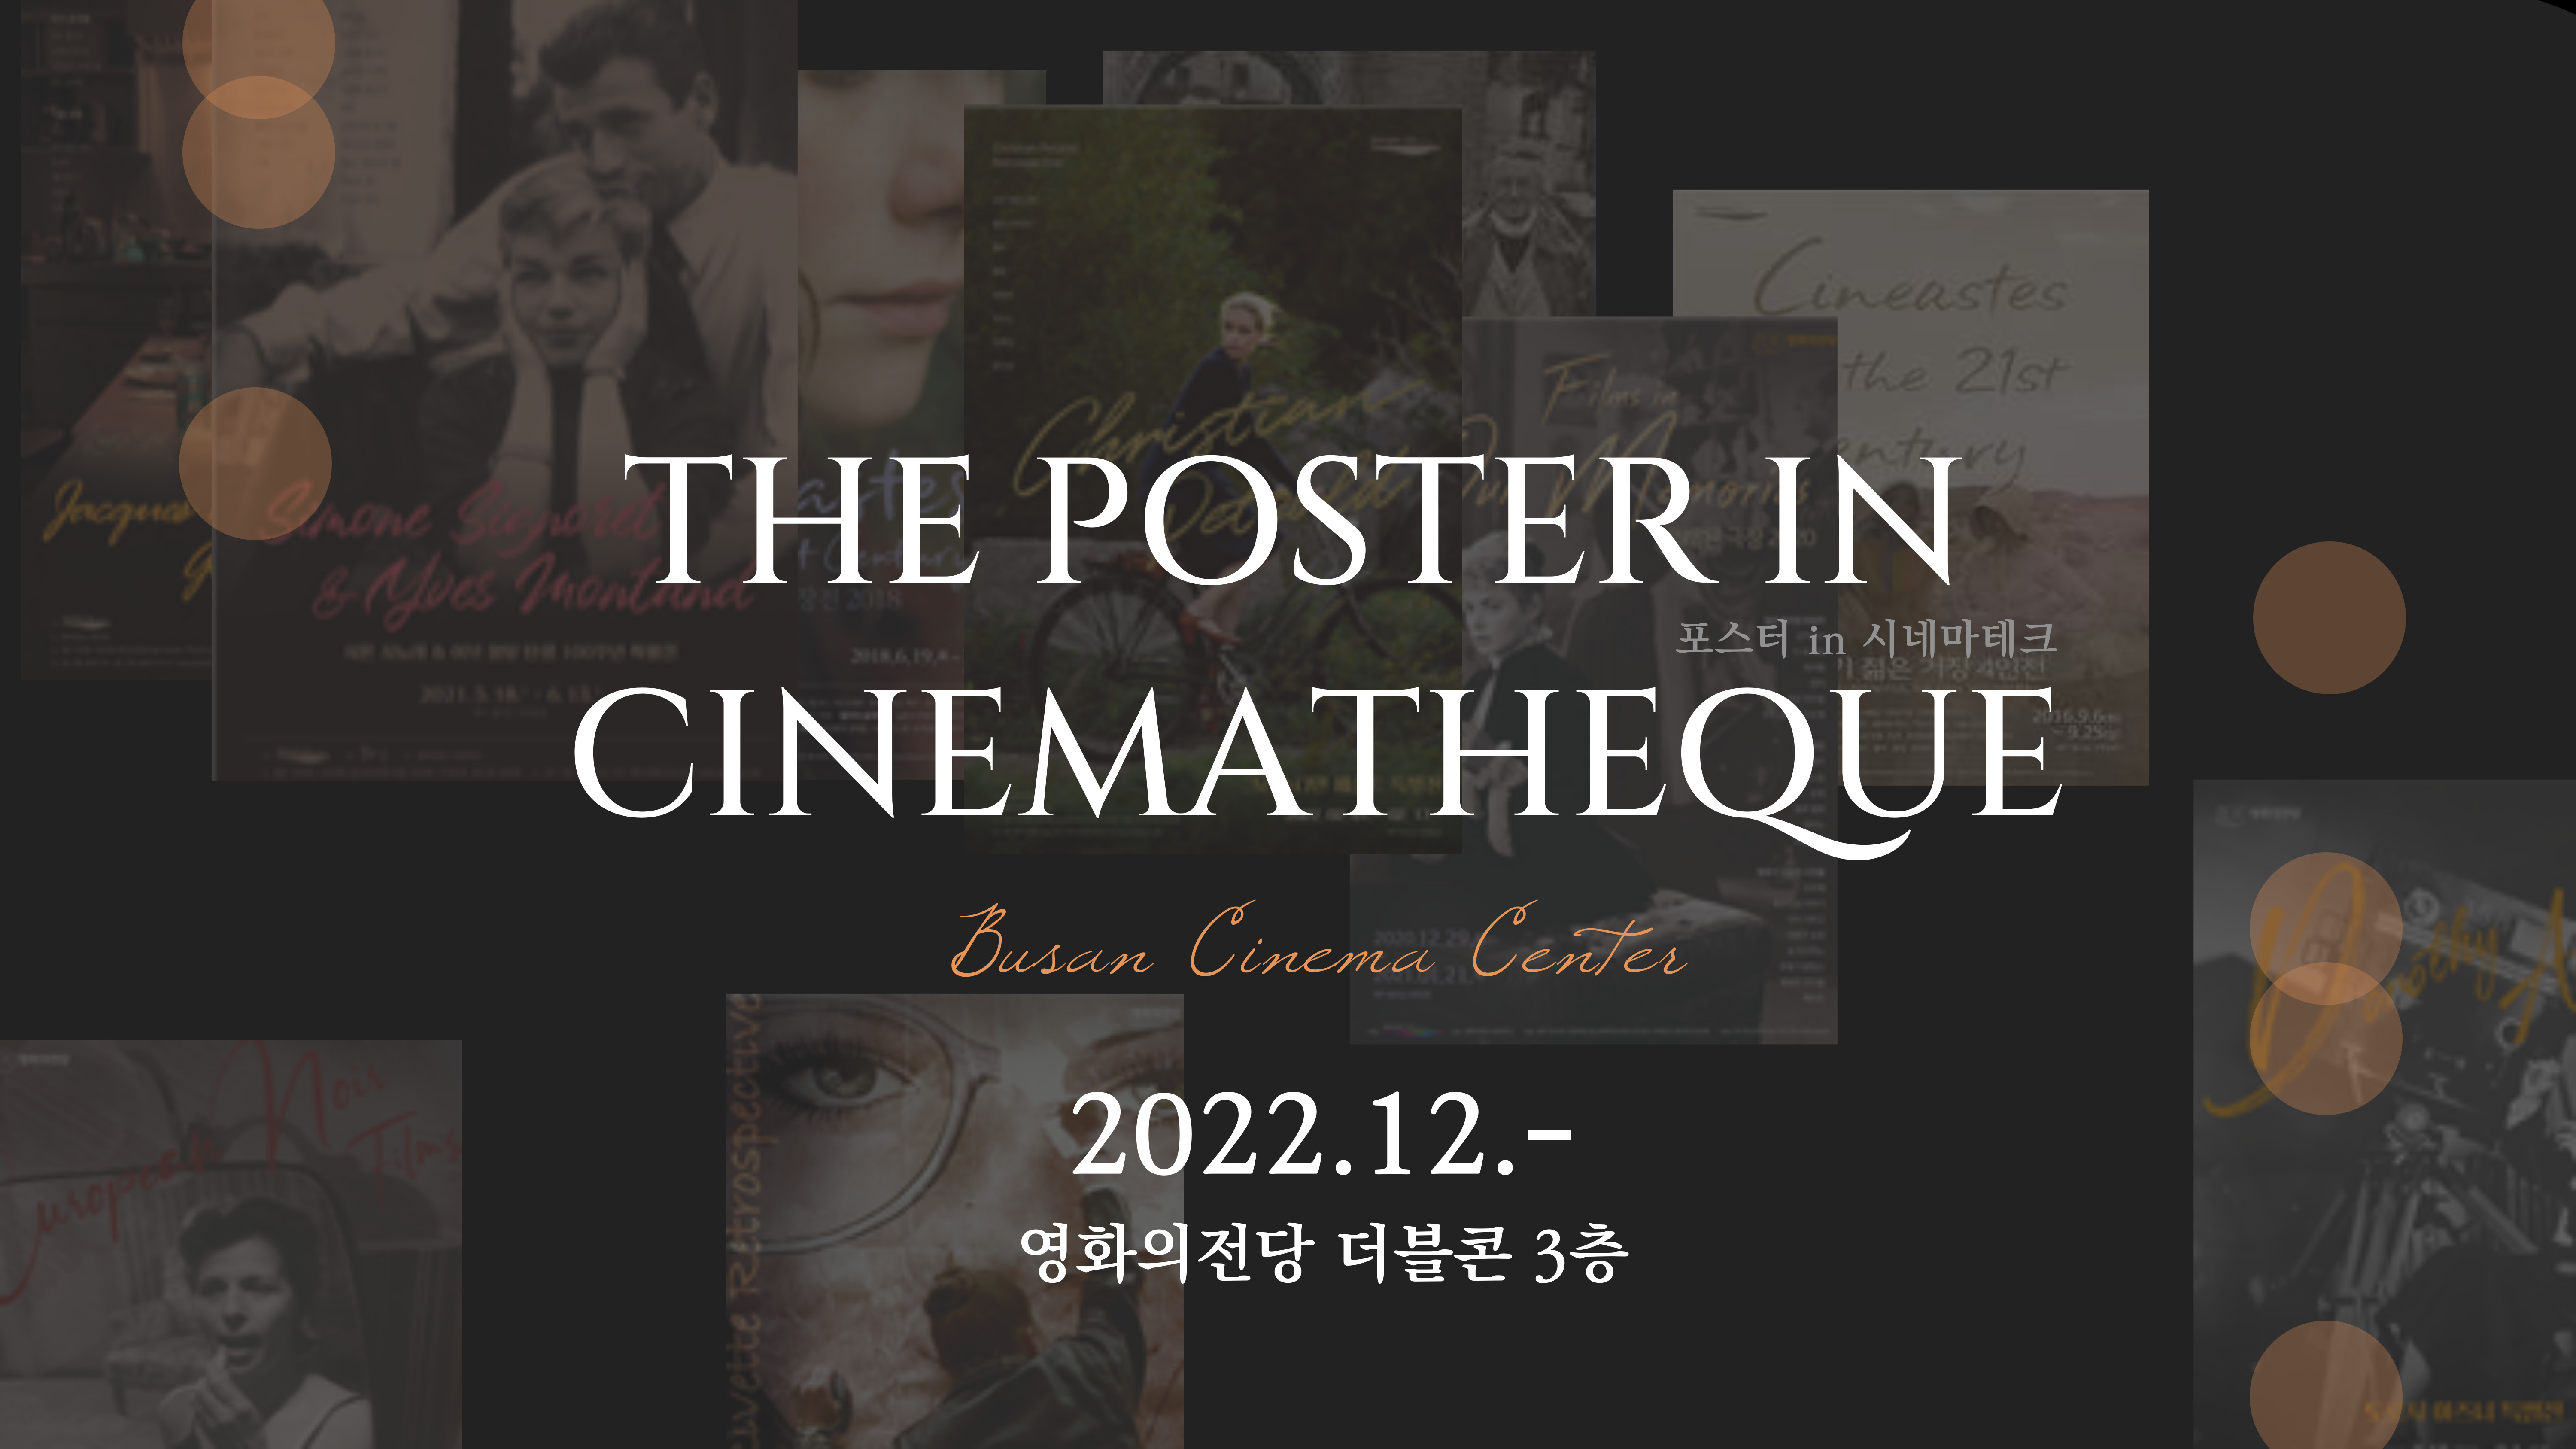 THE POSTER IN CINEMATHEQUE 포스터 in 시네마테크 Busan Cinema Center 2022.12.- 영화의전당 더블콘 3층